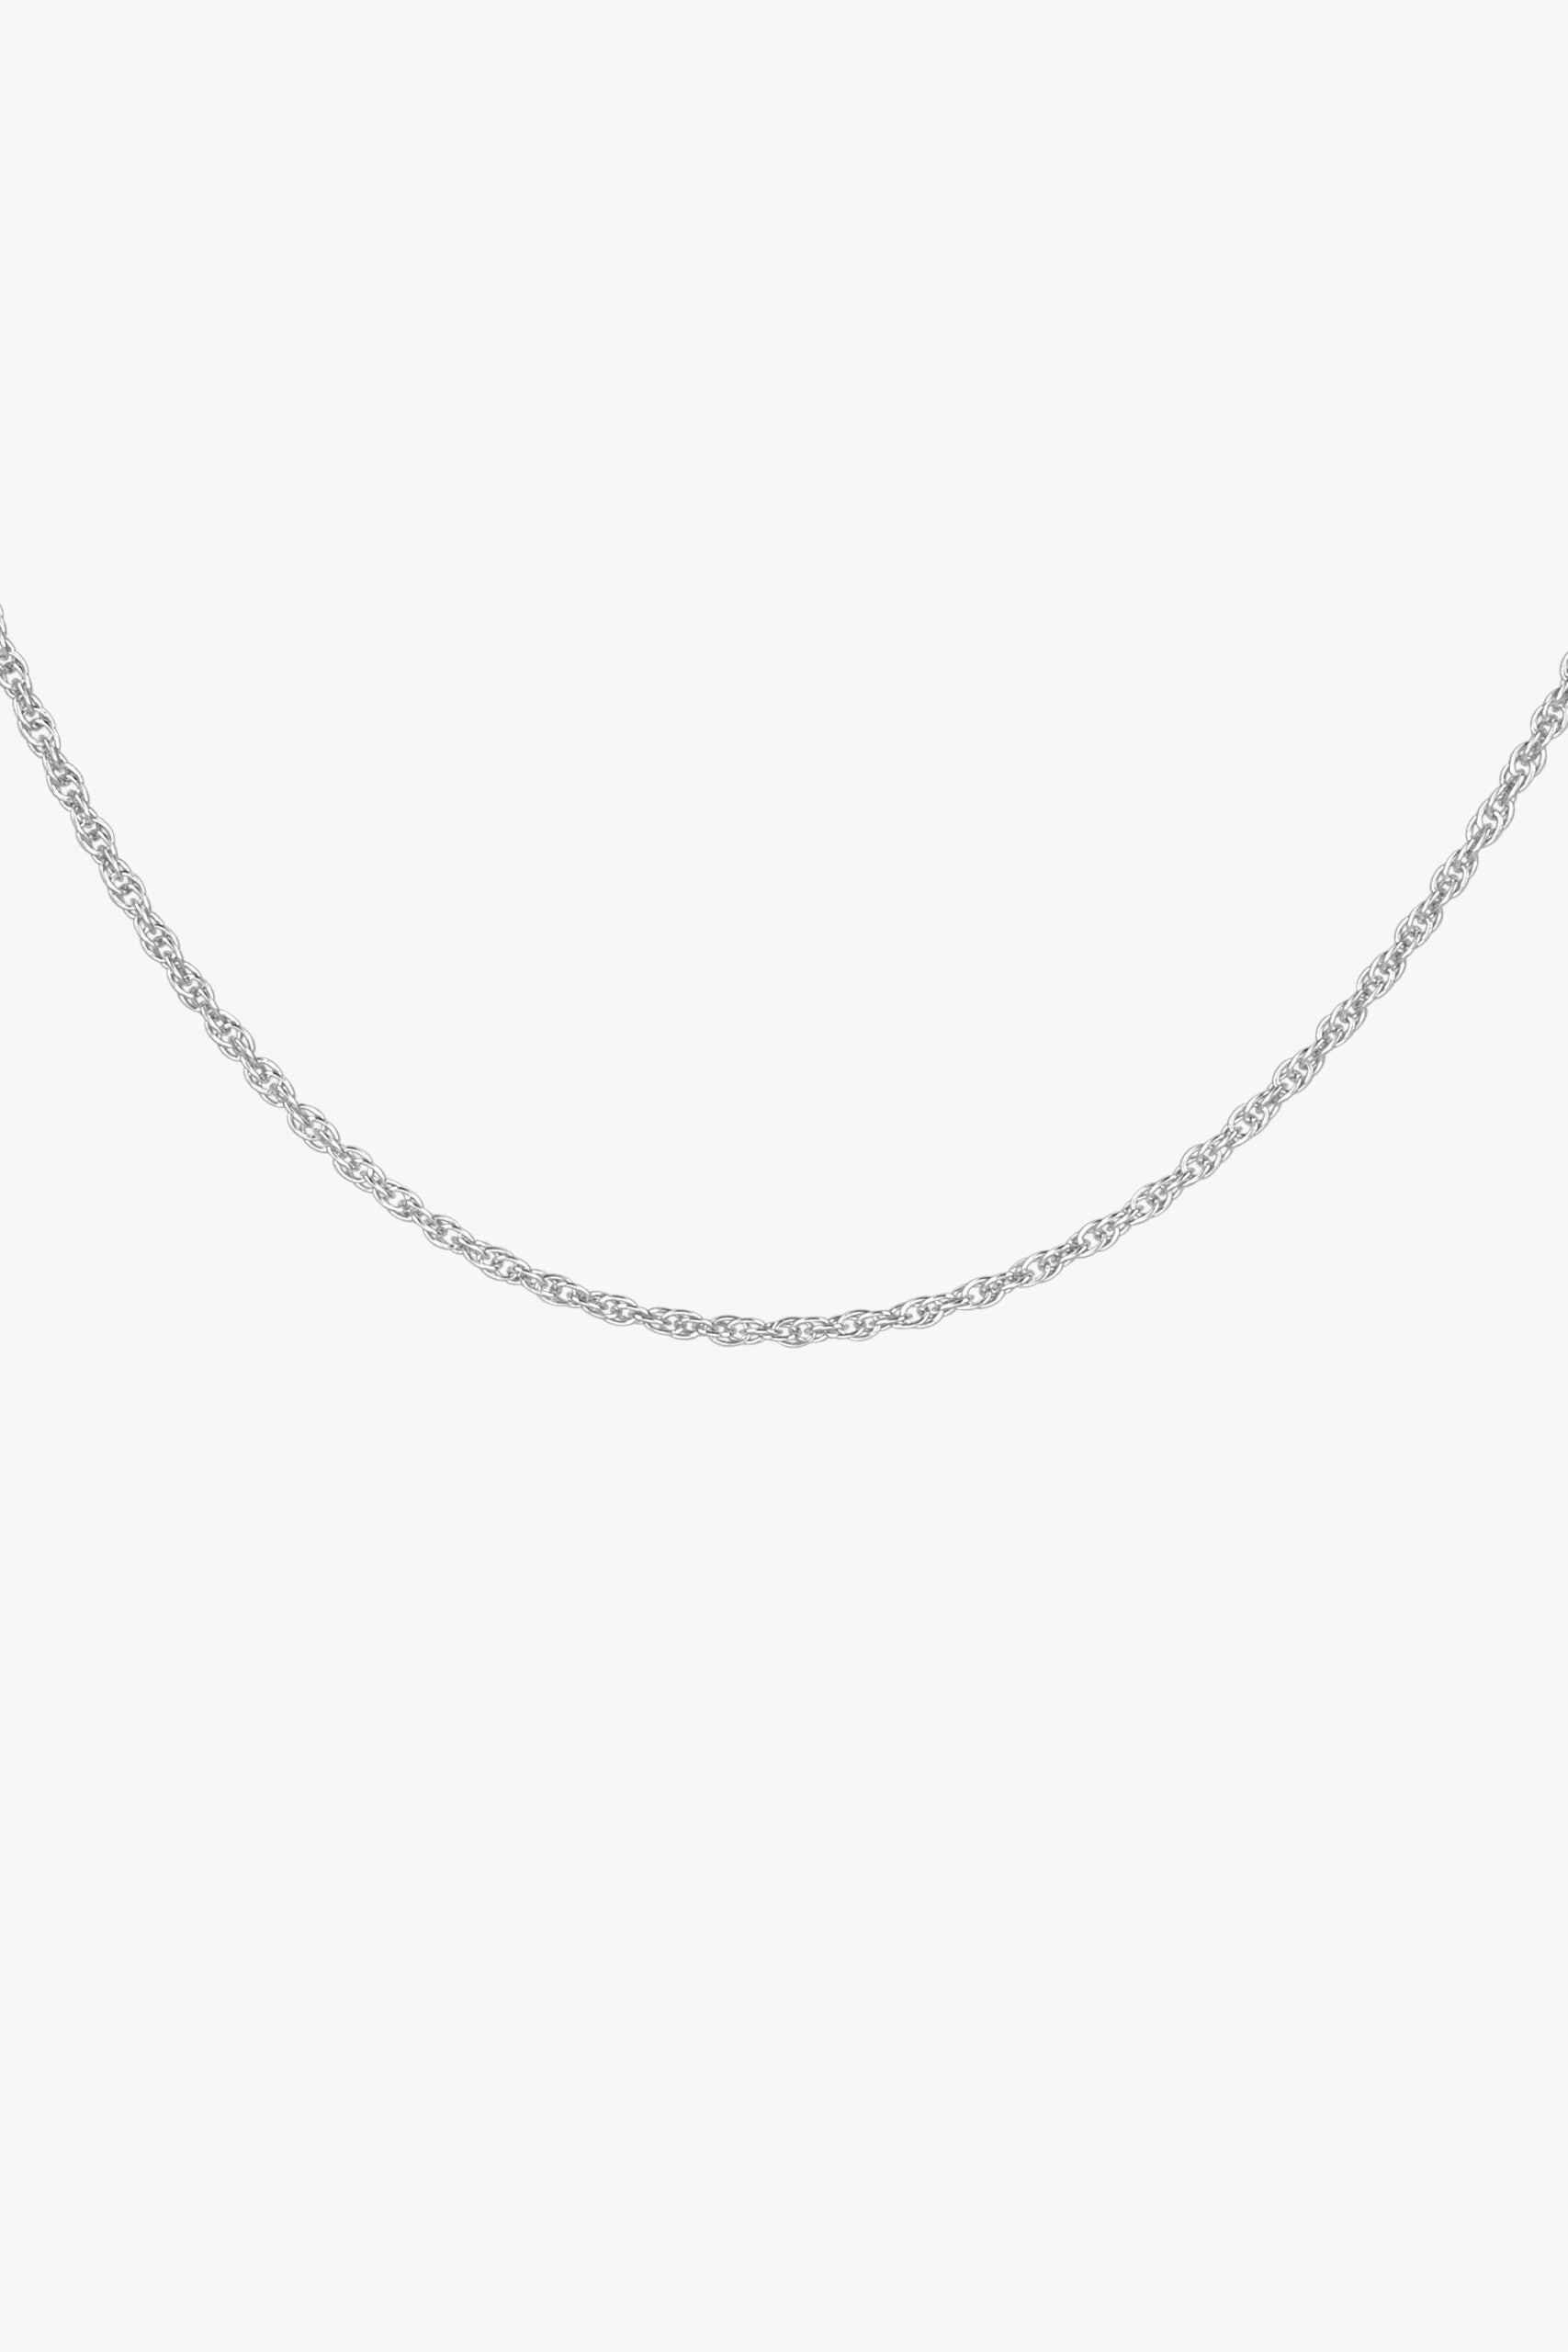 Kette Rope chain necklace Silber 45 cm | wildthings